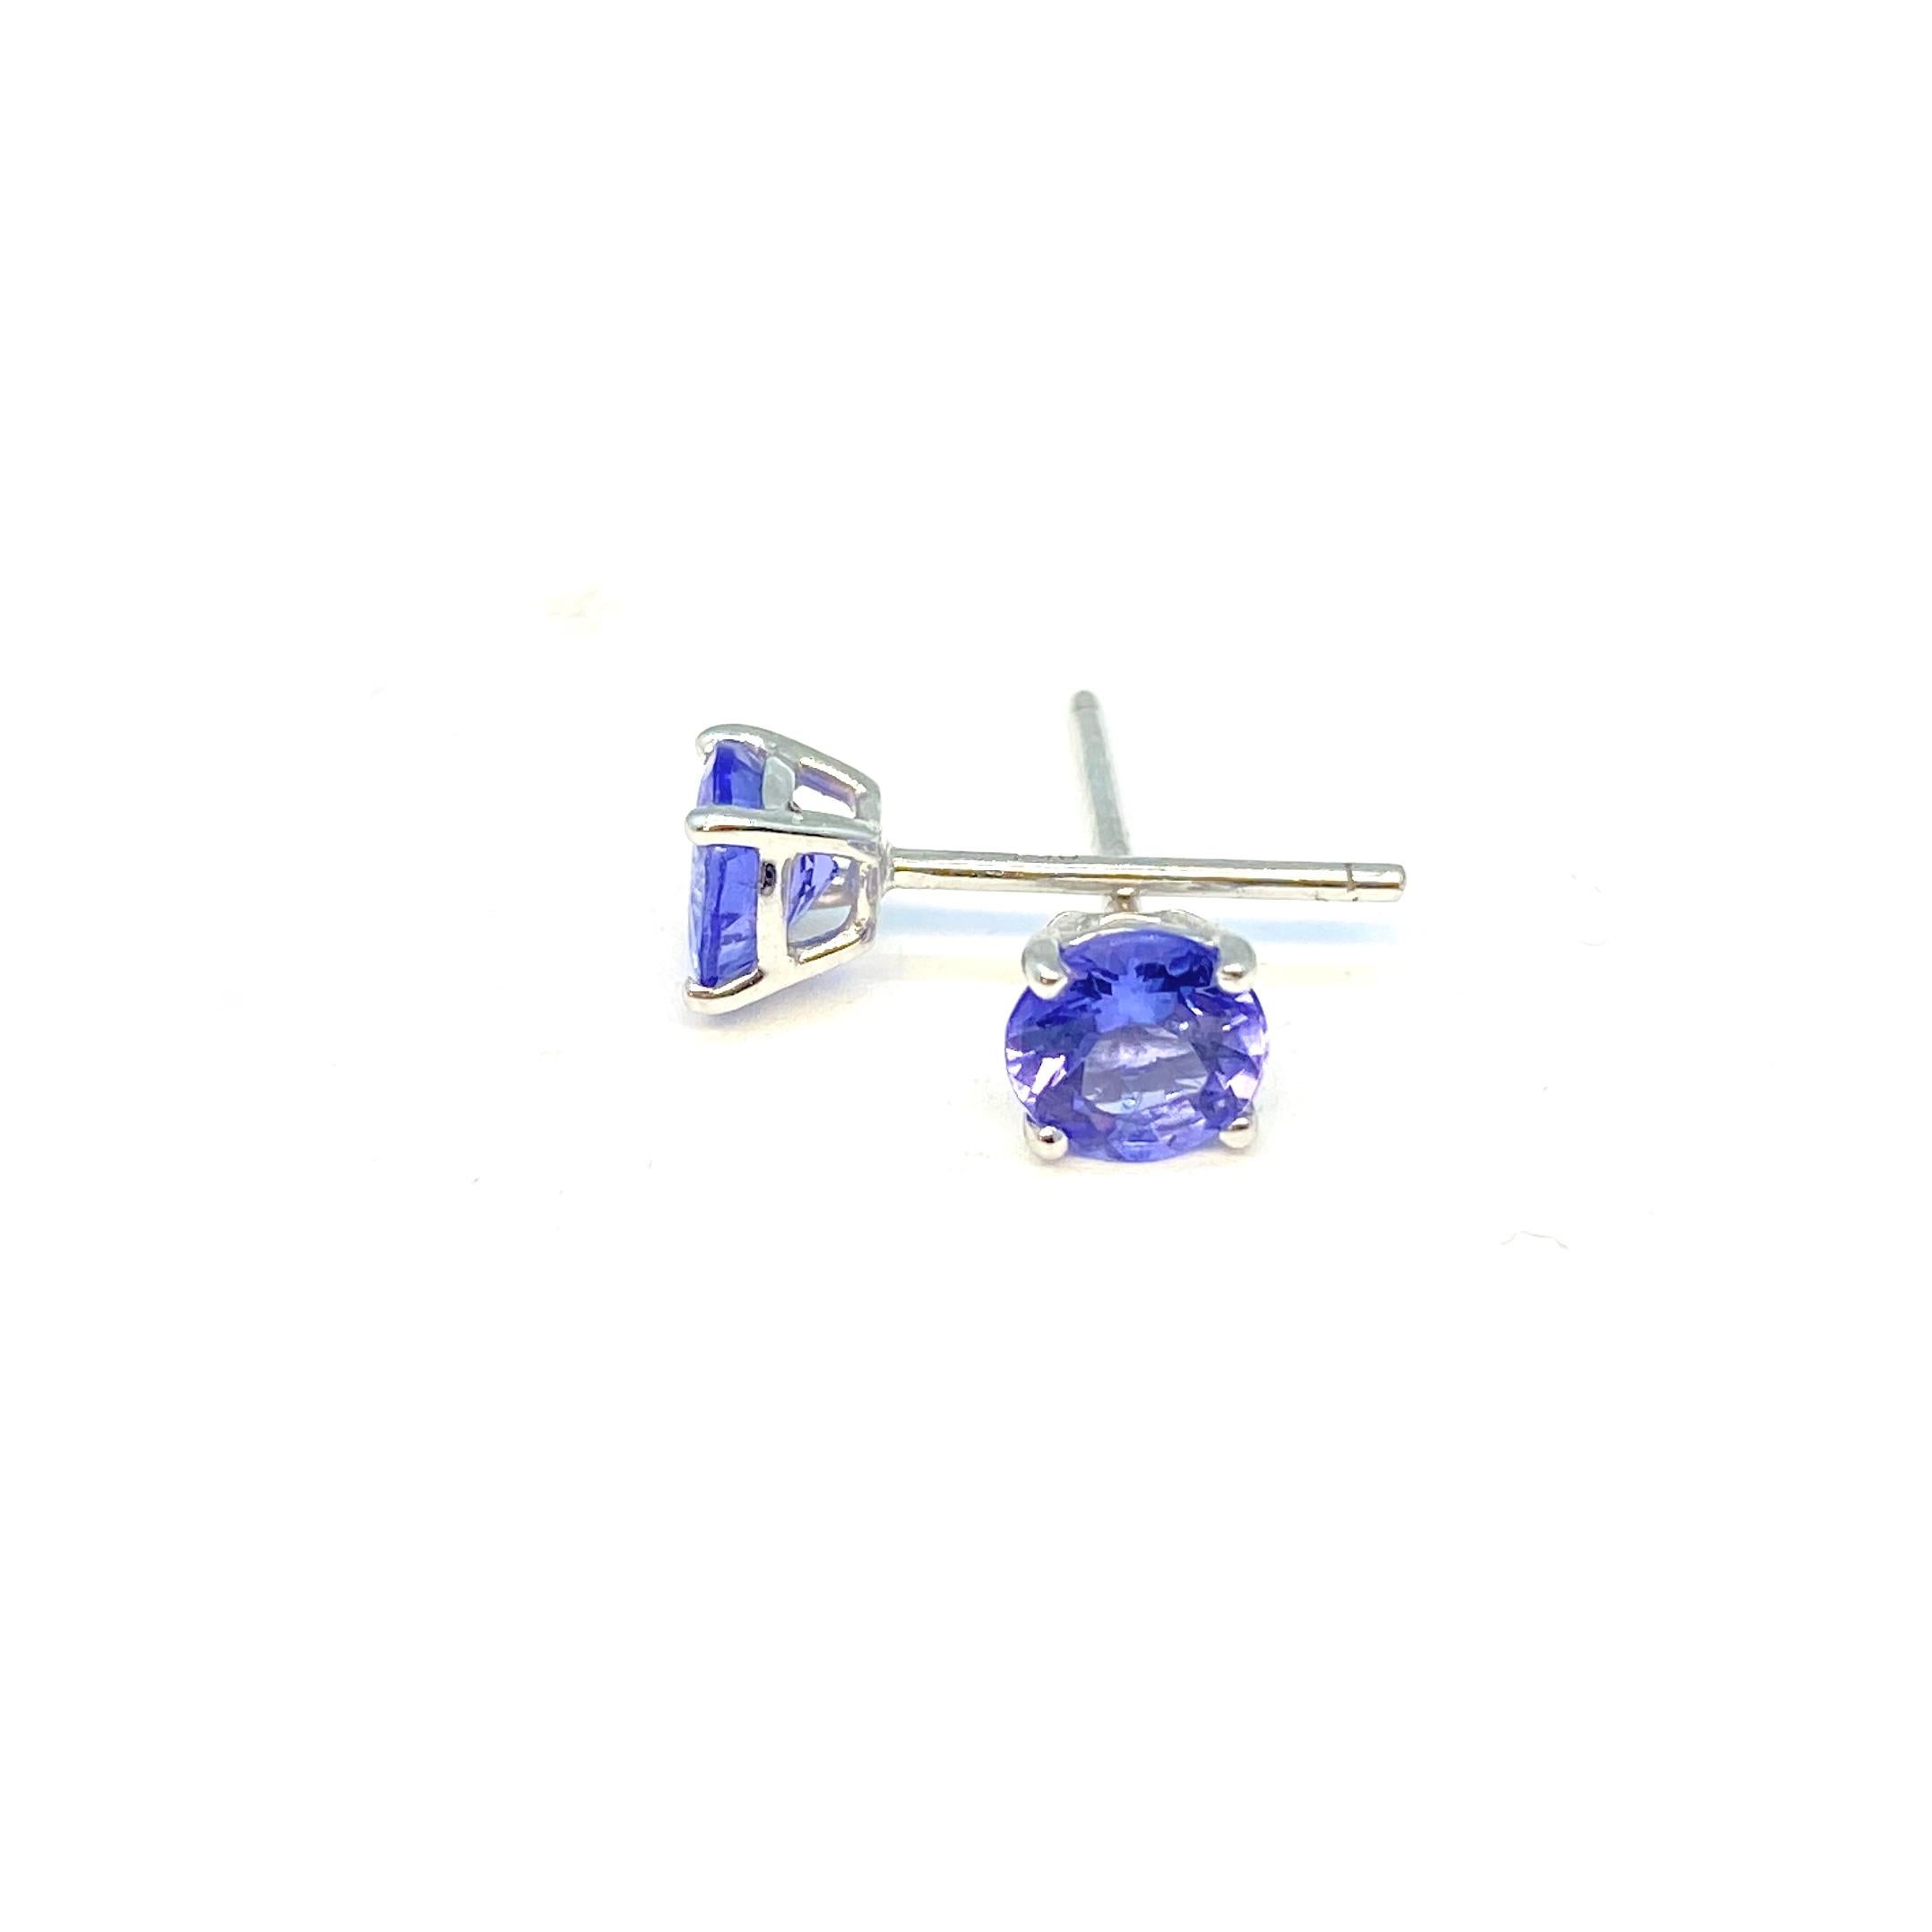 Stud earrings made from polished and rhodium plated 18K/ 750 white gold with 2 blue-purple brilliant cut tanzanites, 1.13ct., Ø: 5.1mm 
Height: 2.9mm

Introducing the Lesunja Earring Collection featuring white gold tanzanite earrings, designed to